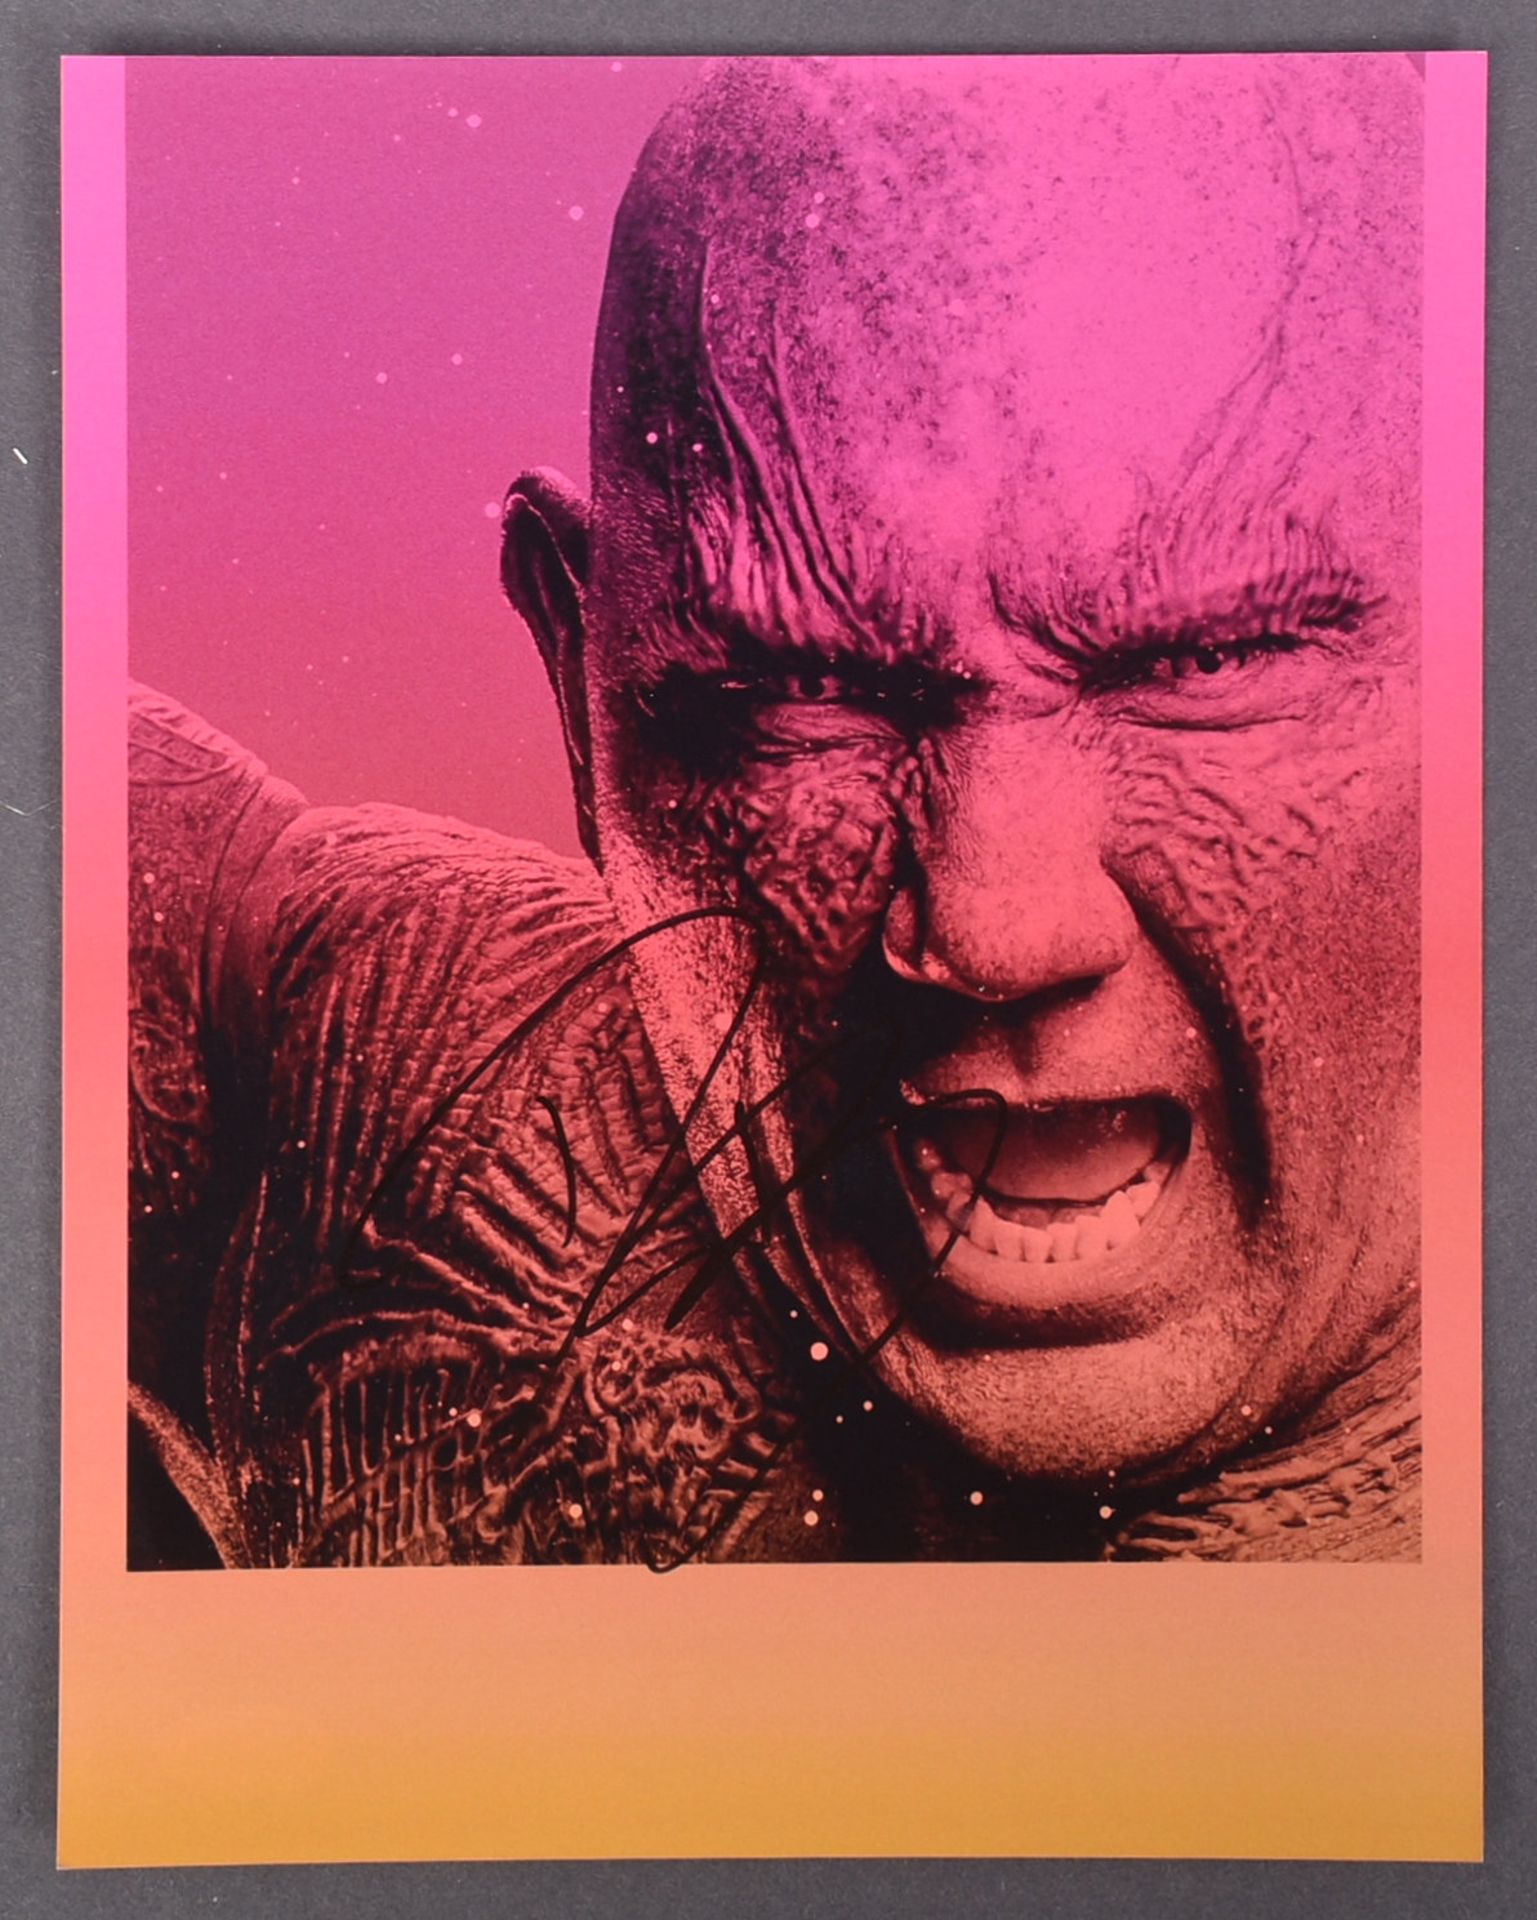 GUARDIANS OF THE GALAXY - DAVE BAUTISTA - SIGNED 8X10" - ACOA